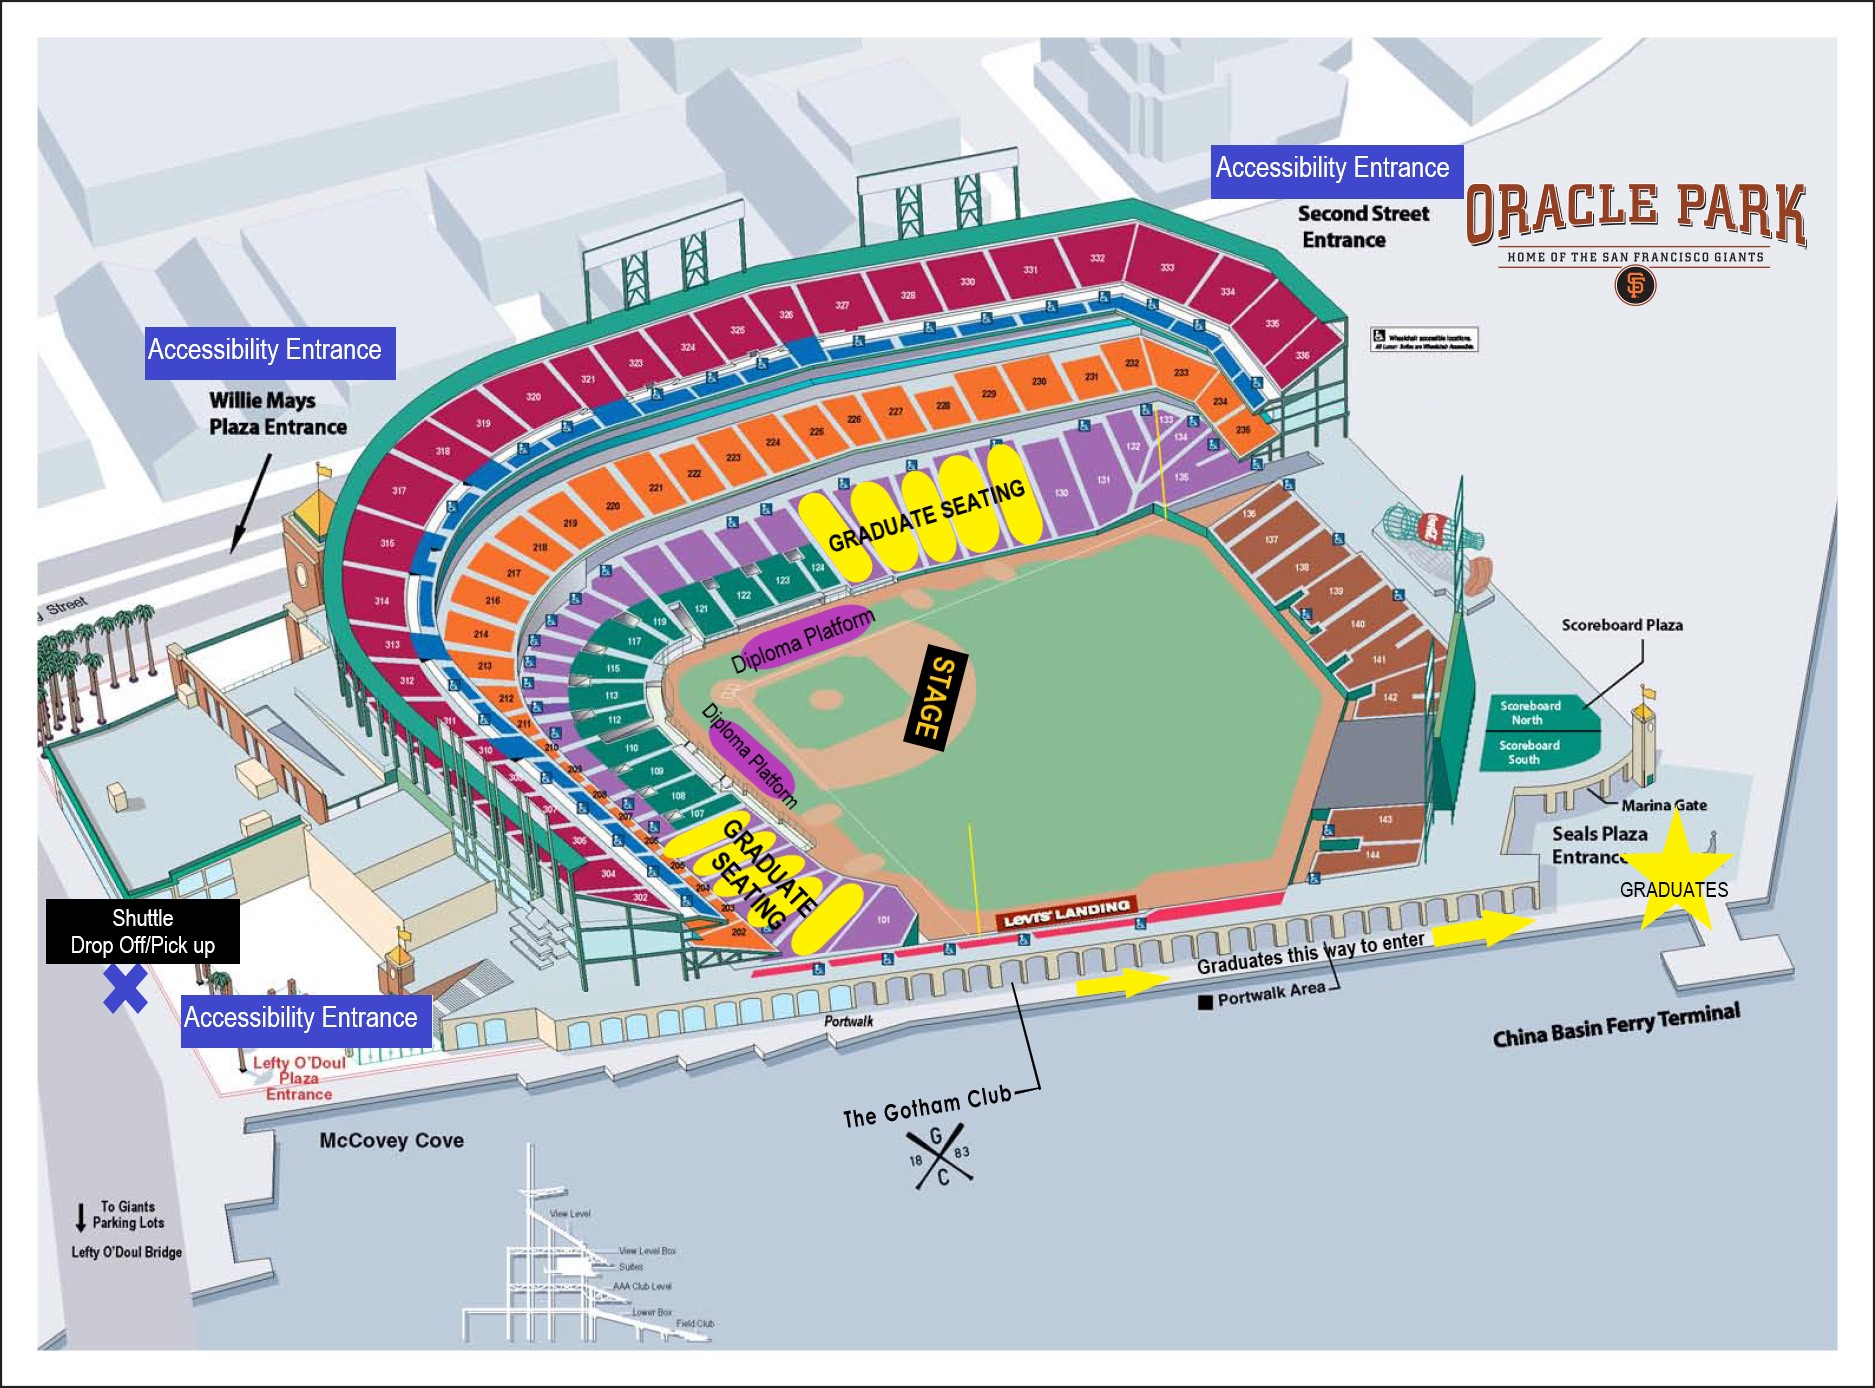 Map of Oracle Park